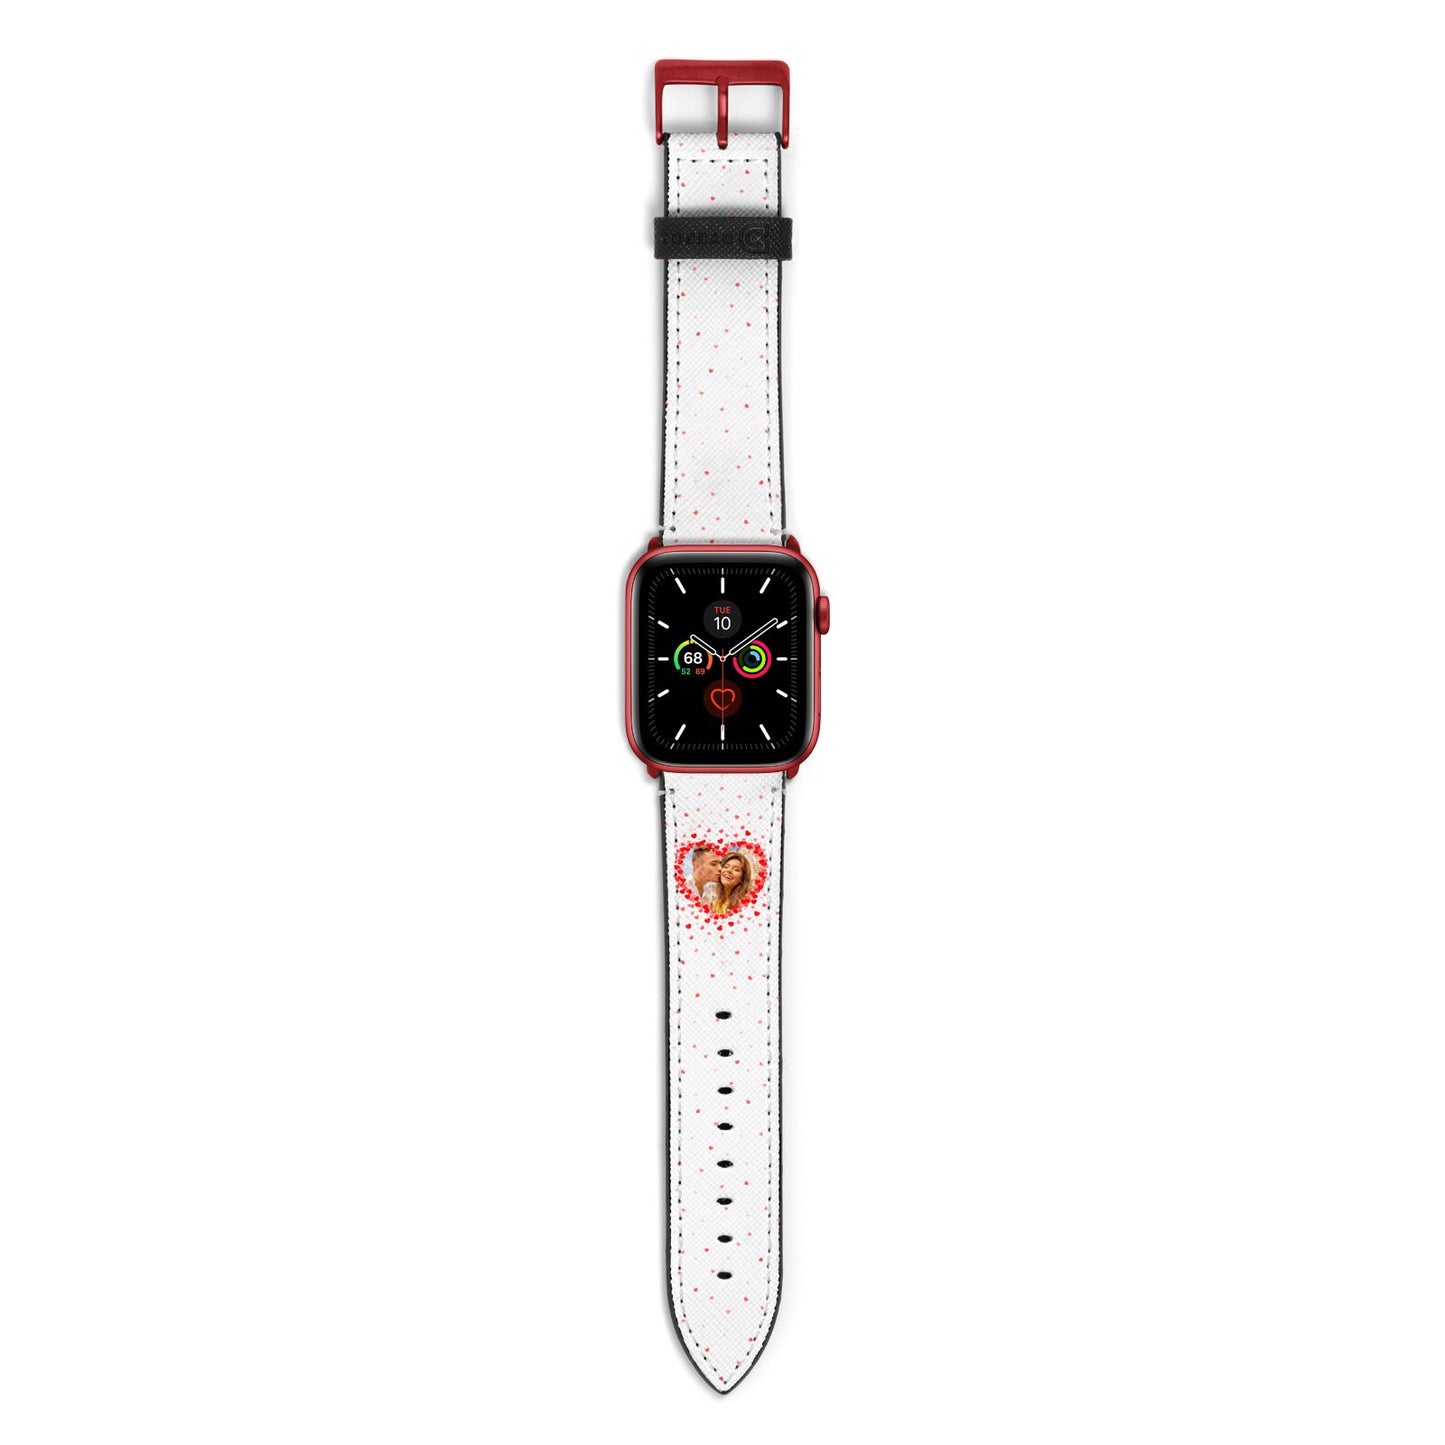 Photo Confetti Heart Apple Watch Strap with Red Hardware